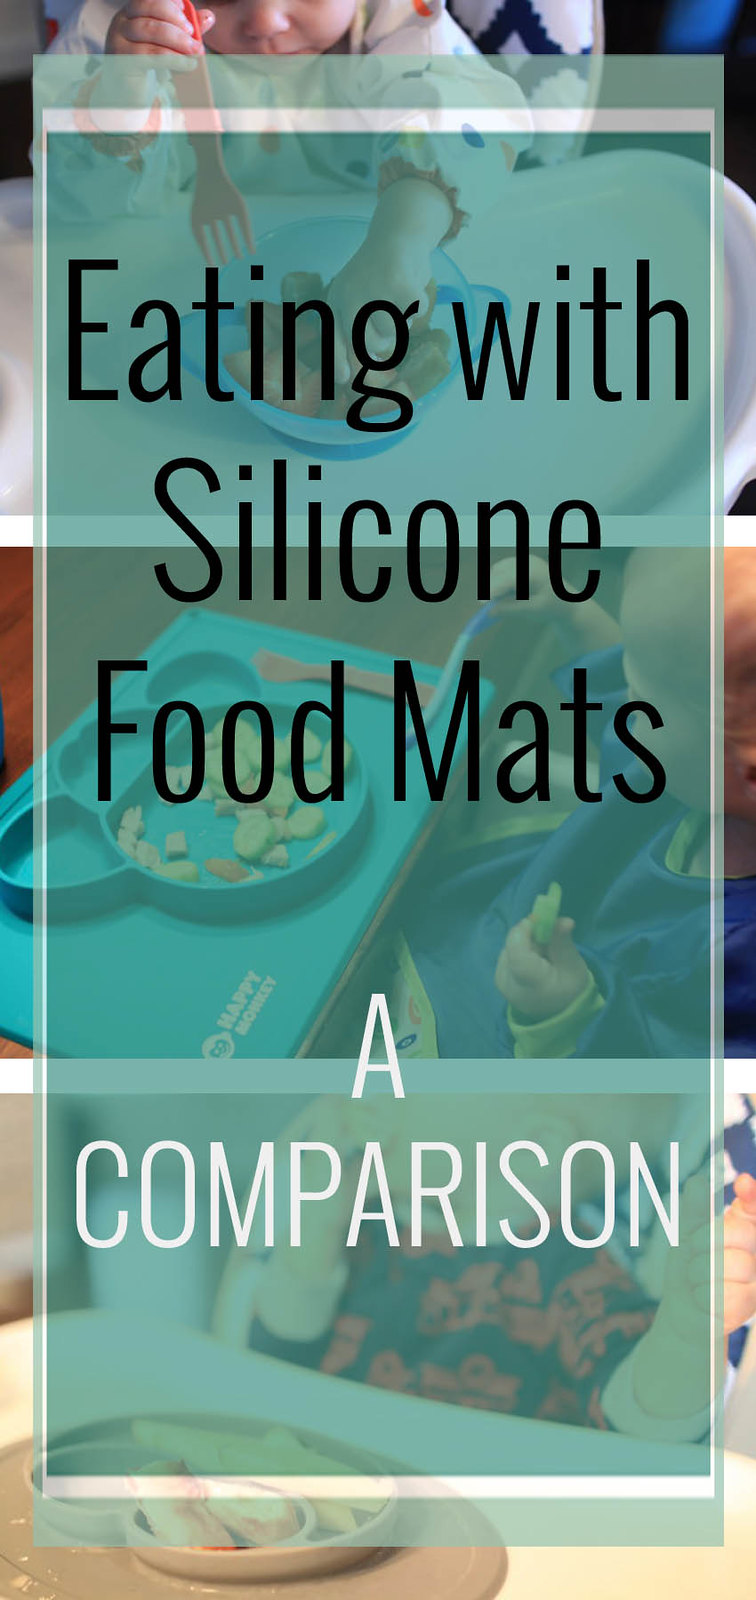 Eating with Silicone Food Mats